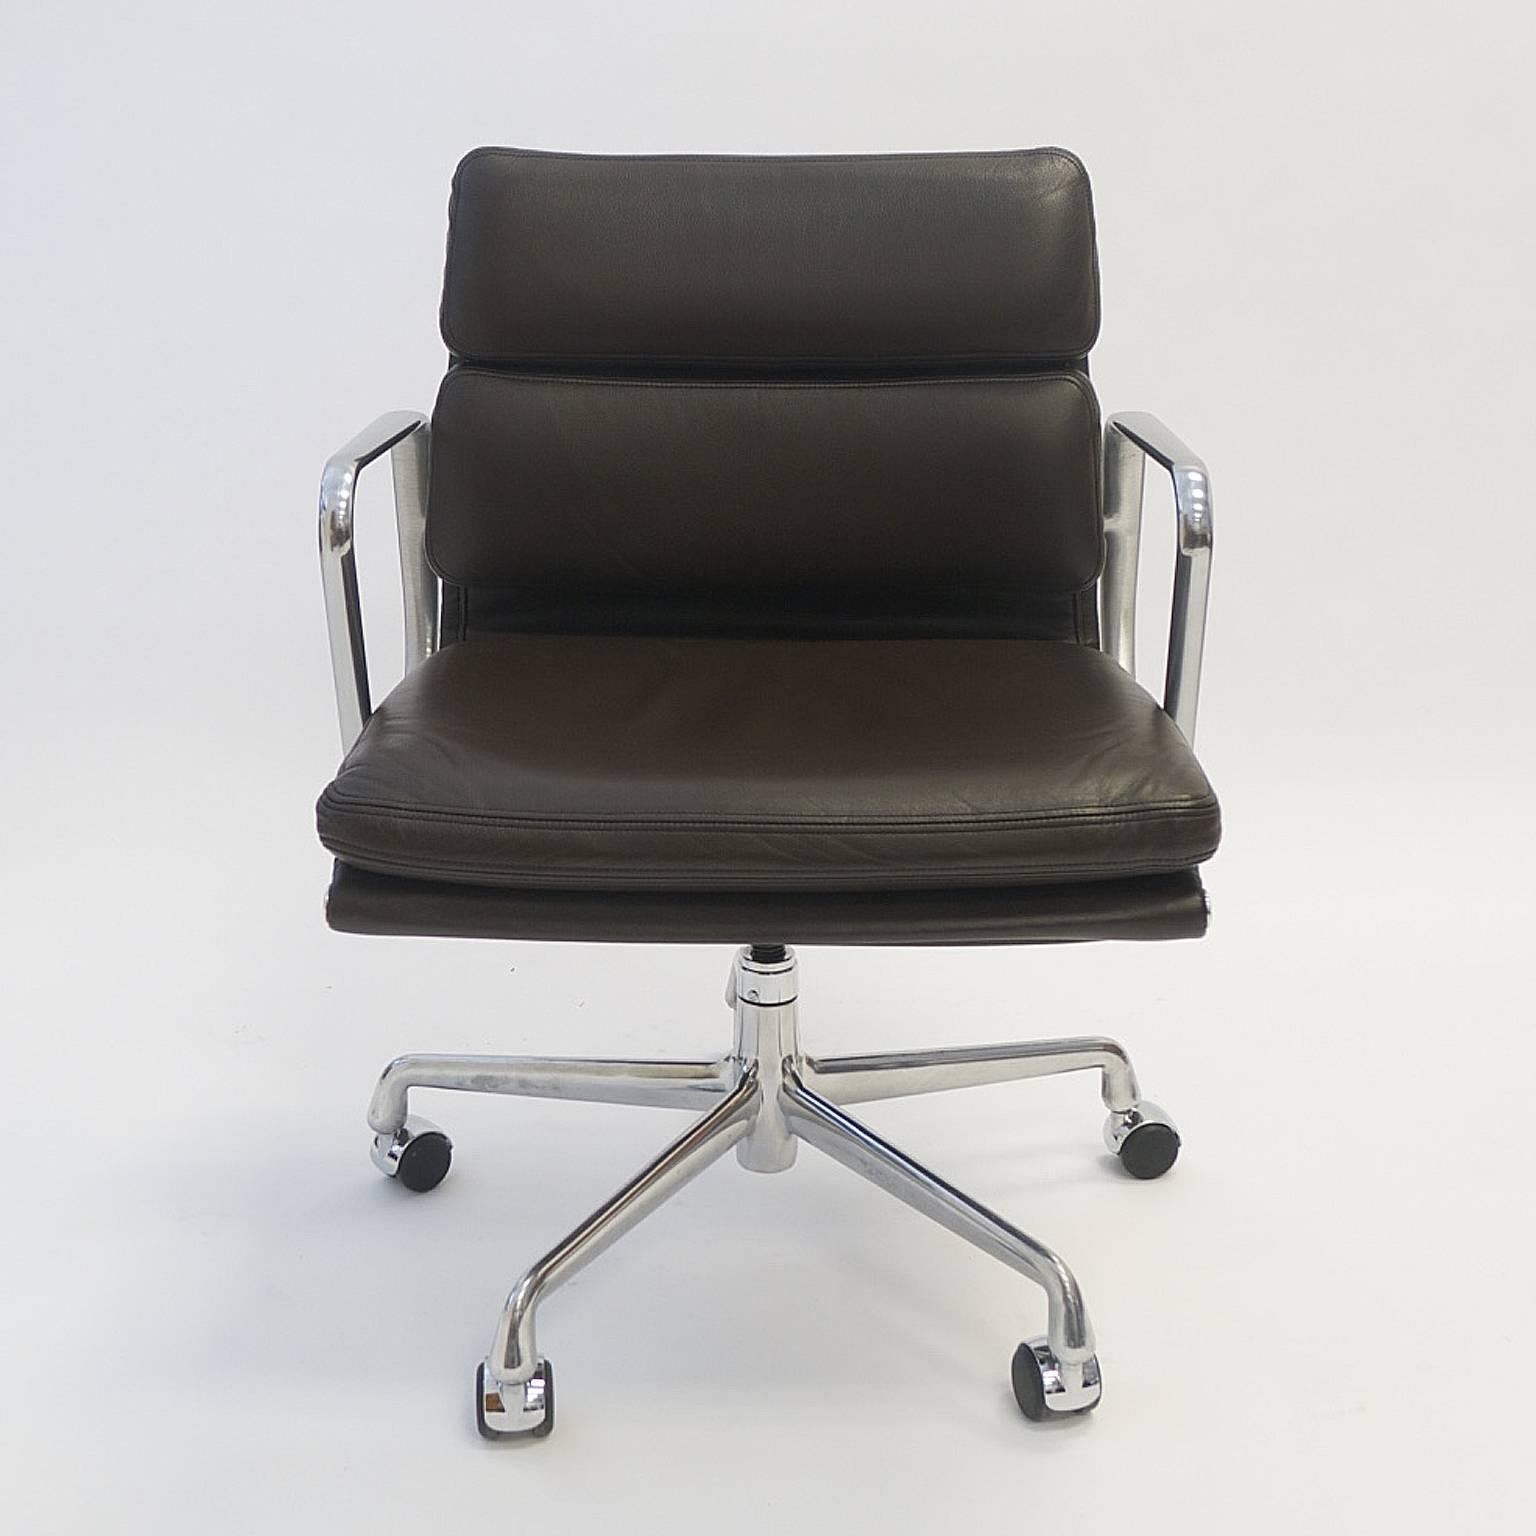 20th Century Charles and Ray Eames Soft Pad Chair in Leather by Herman Miller